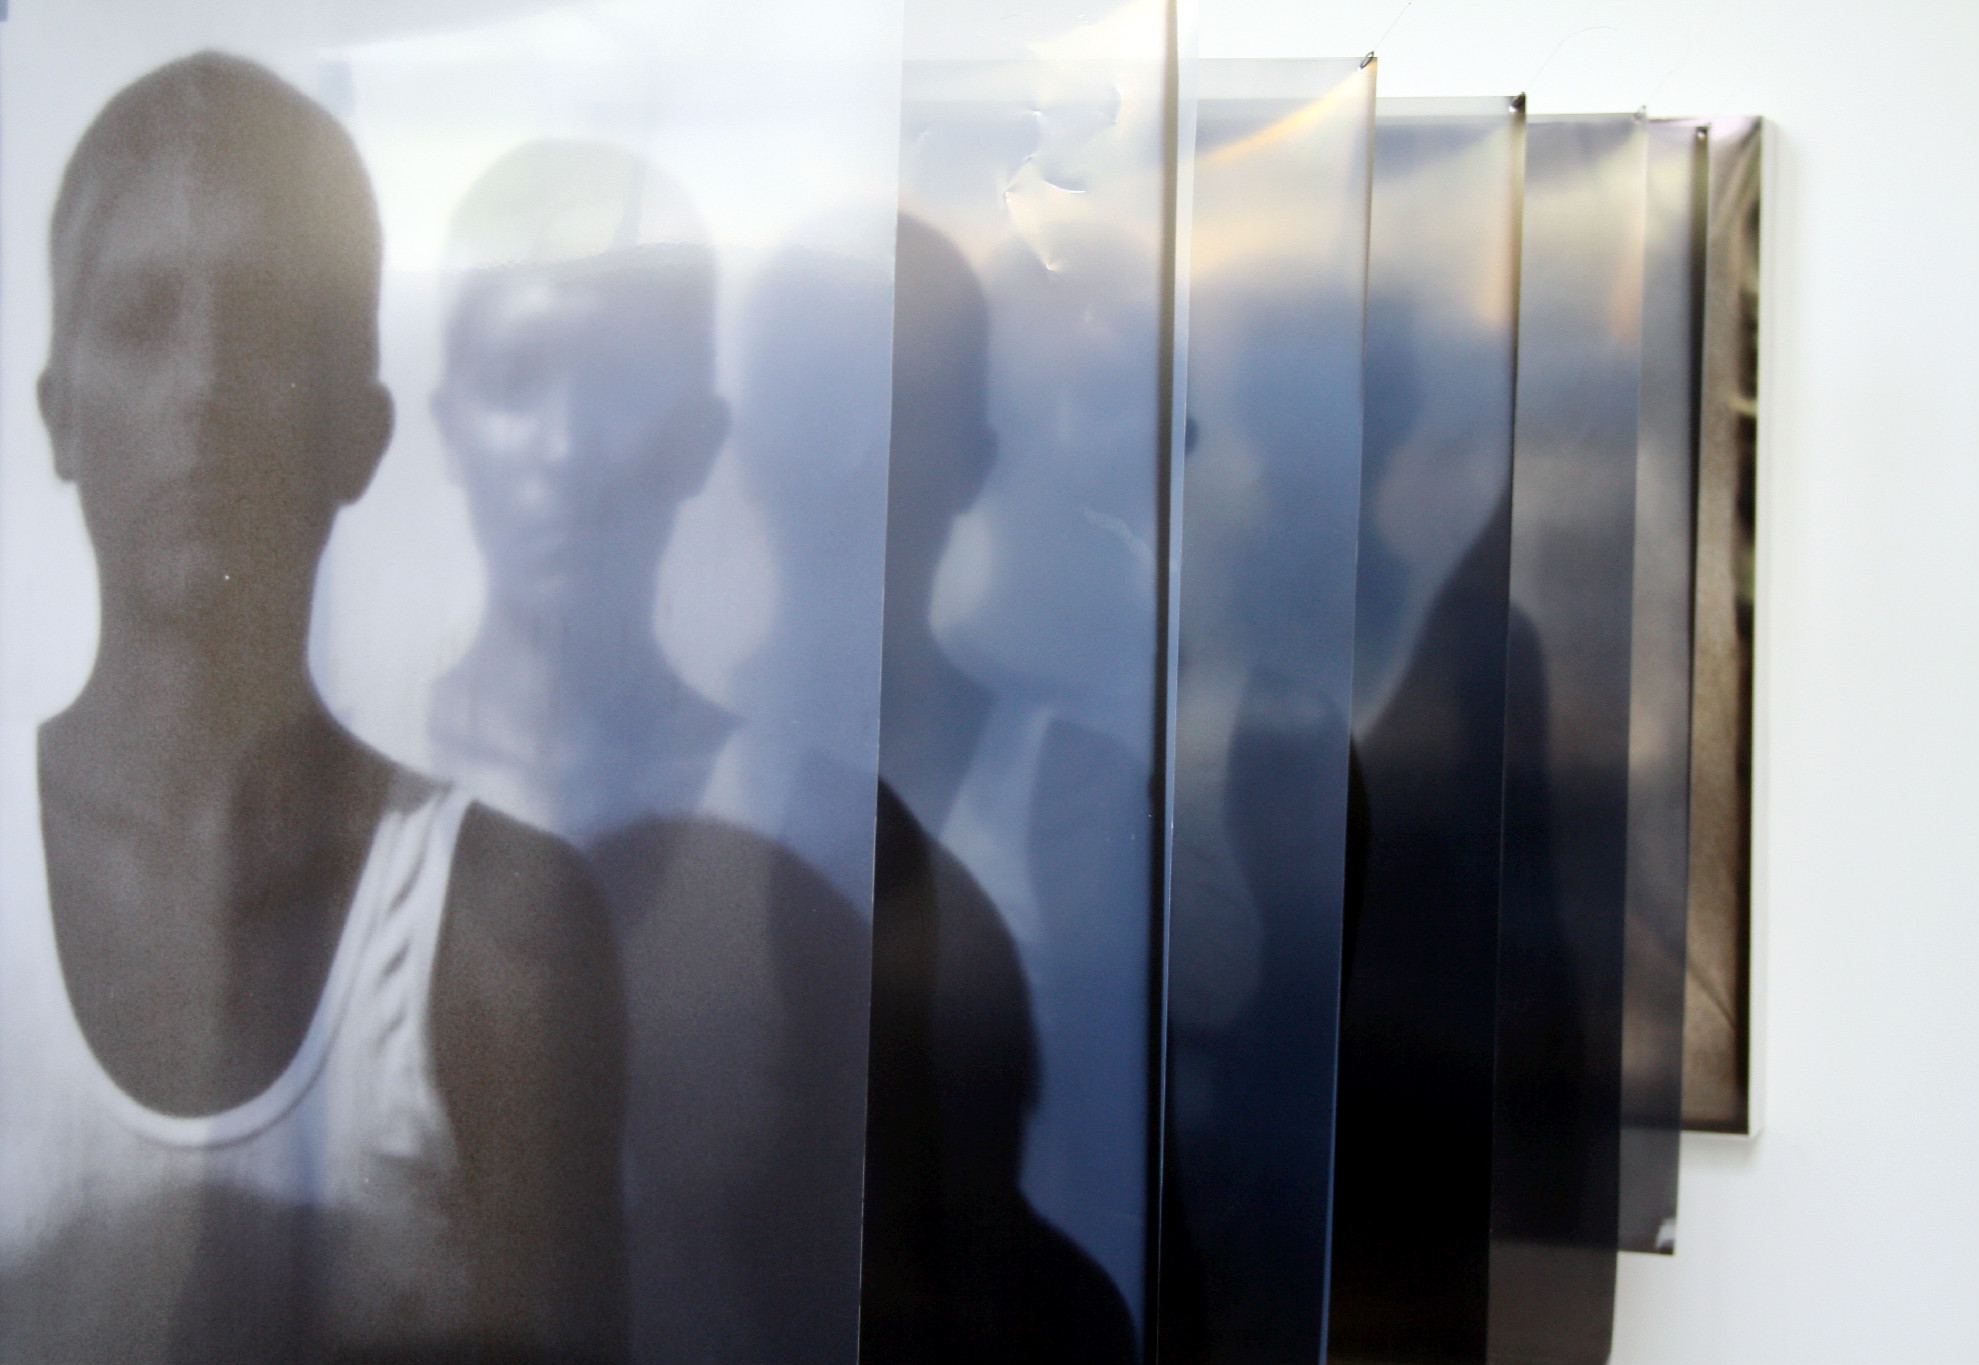 An image of a human figure in a white tank top is mirrored by seven screens, adding more depth to the figure.